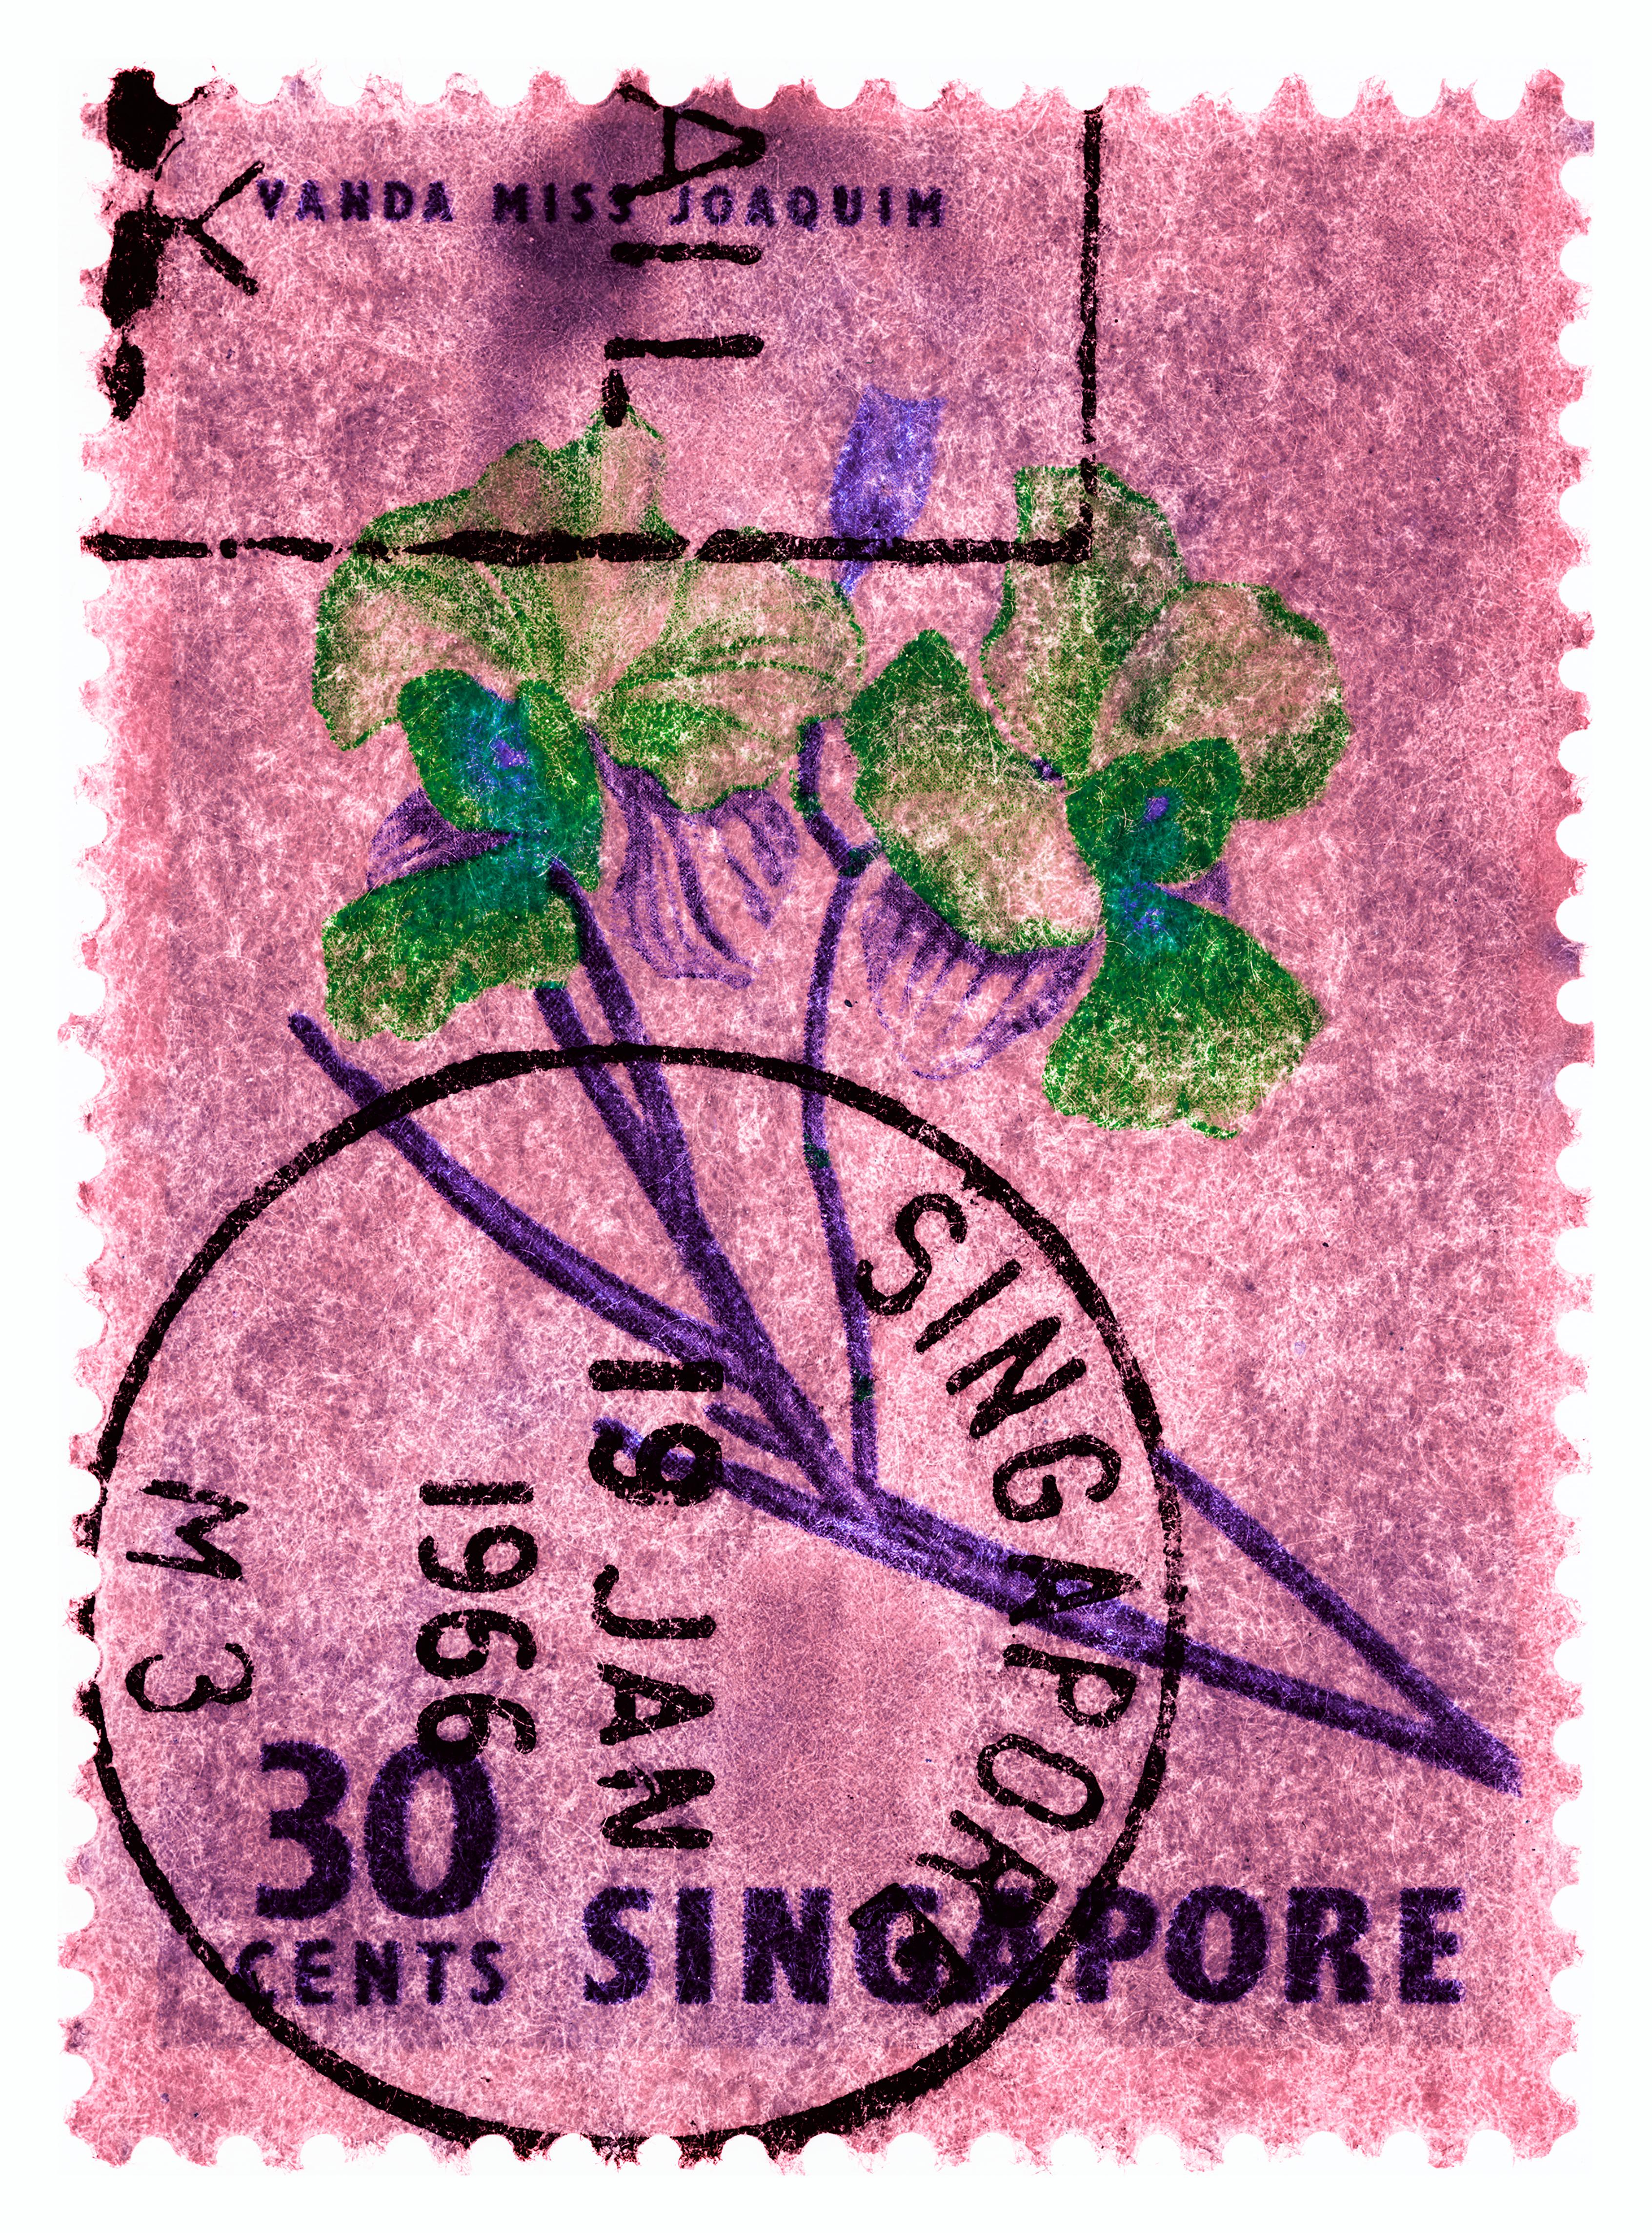 Singapore Stamp Collection, 30c Singapore Three - Floral color photo - Gray Color Photograph by Heidler & Heeps